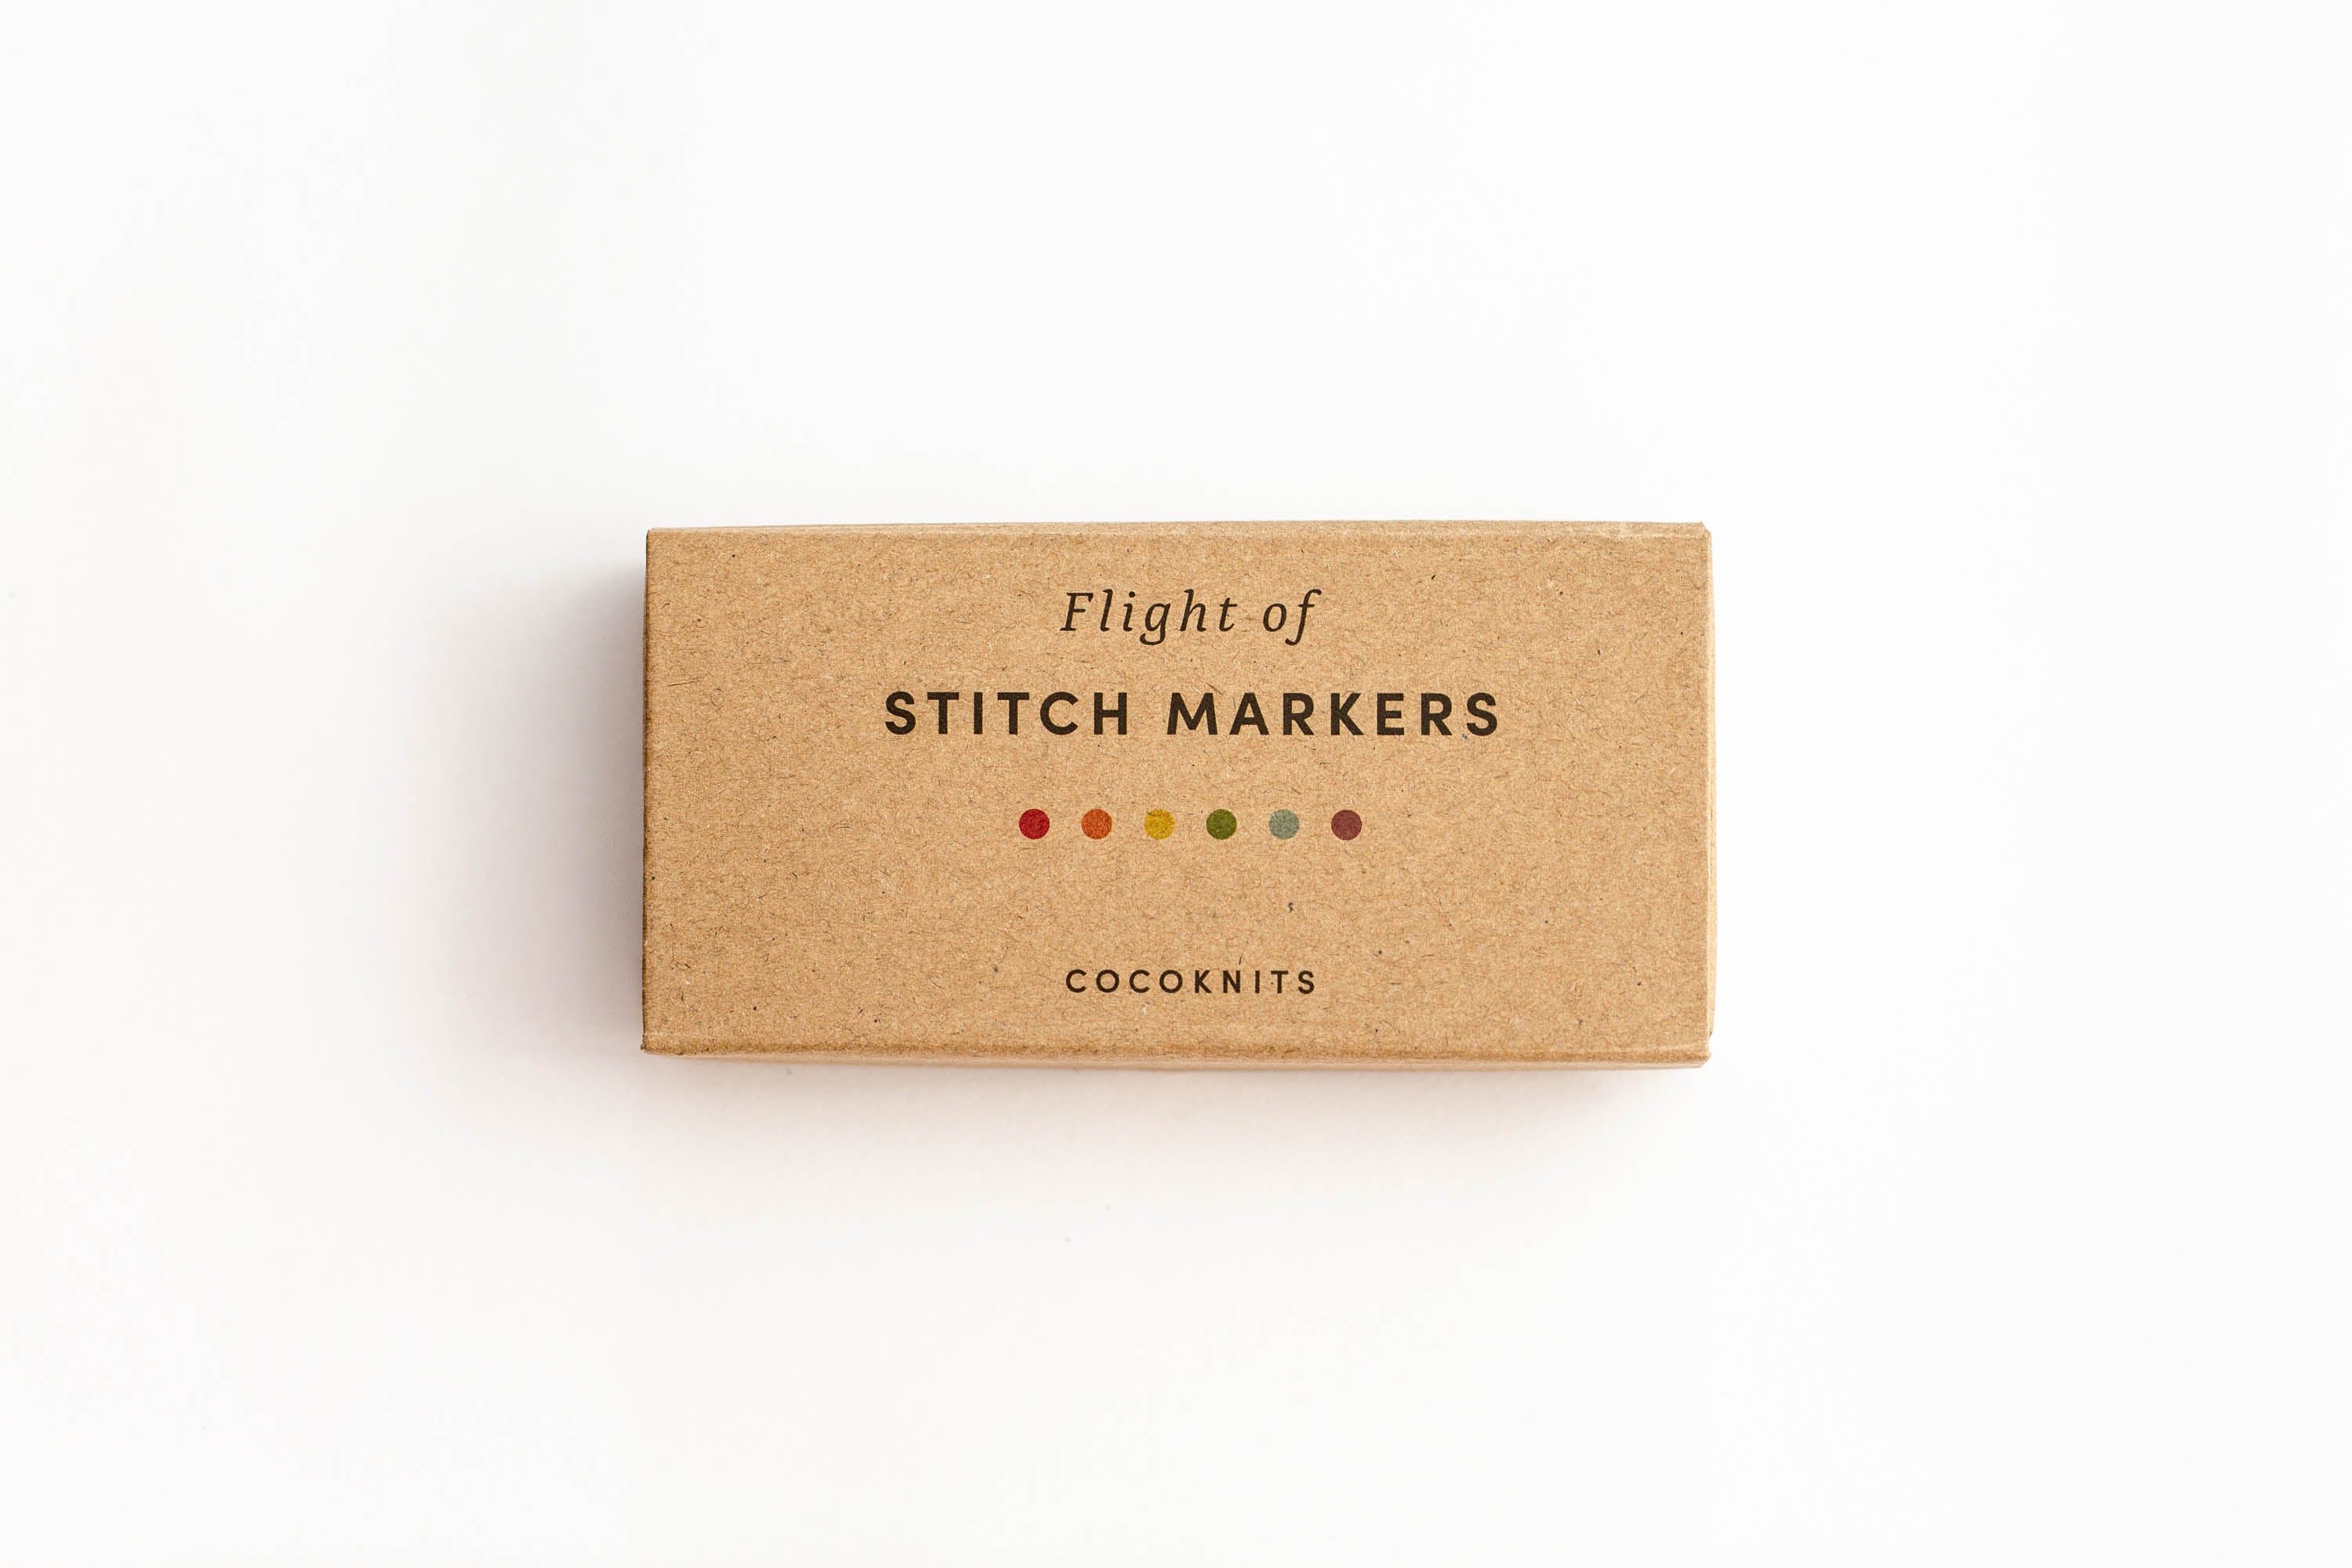 Cocoknits Flight of Stitch Markers